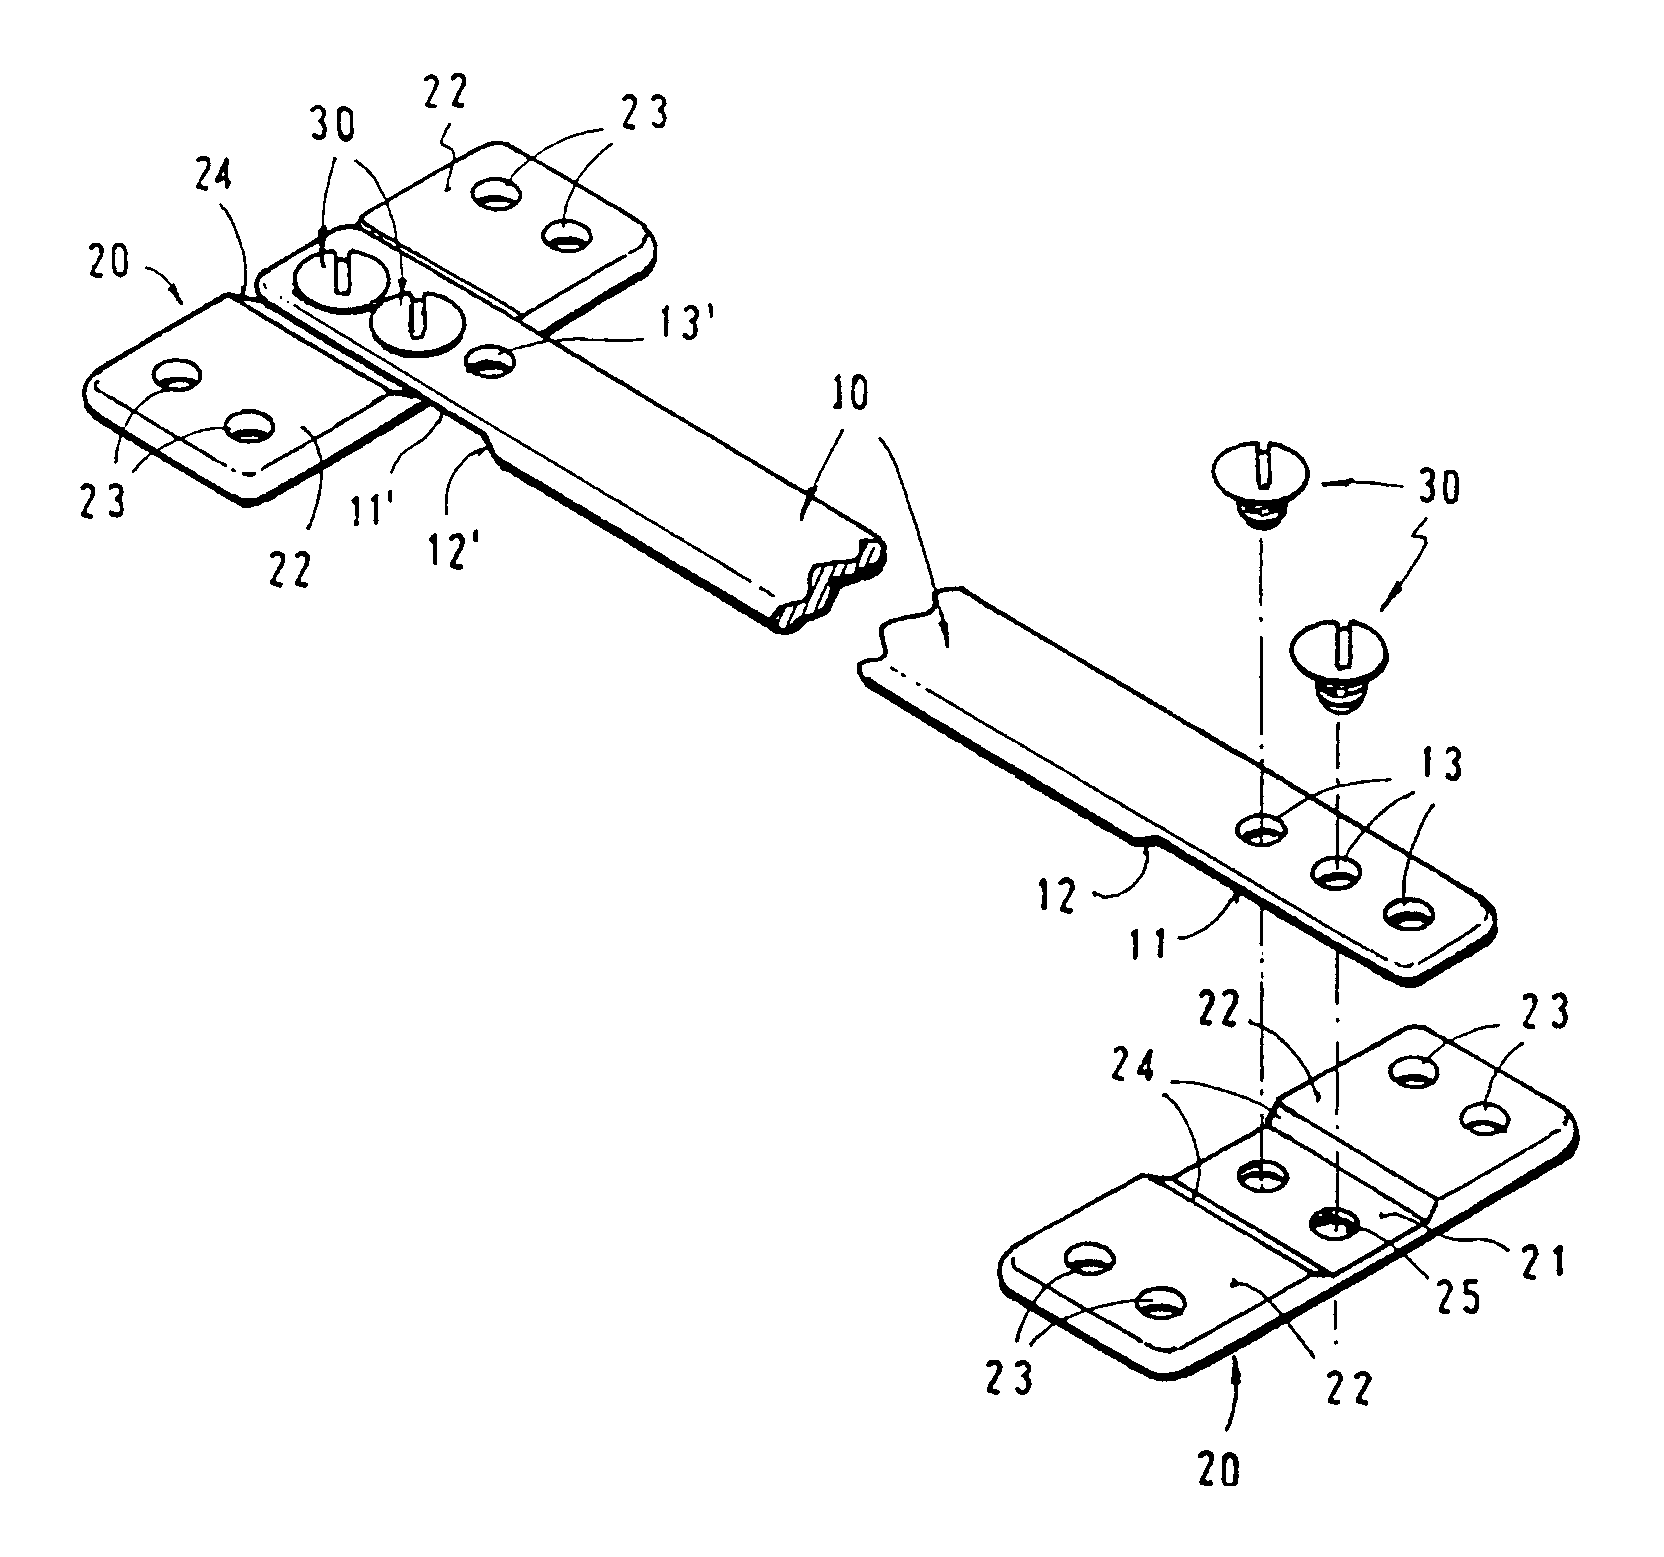 Apparatus for the correction of chest wall deformities such as Pectus Carinatum and method of using the same